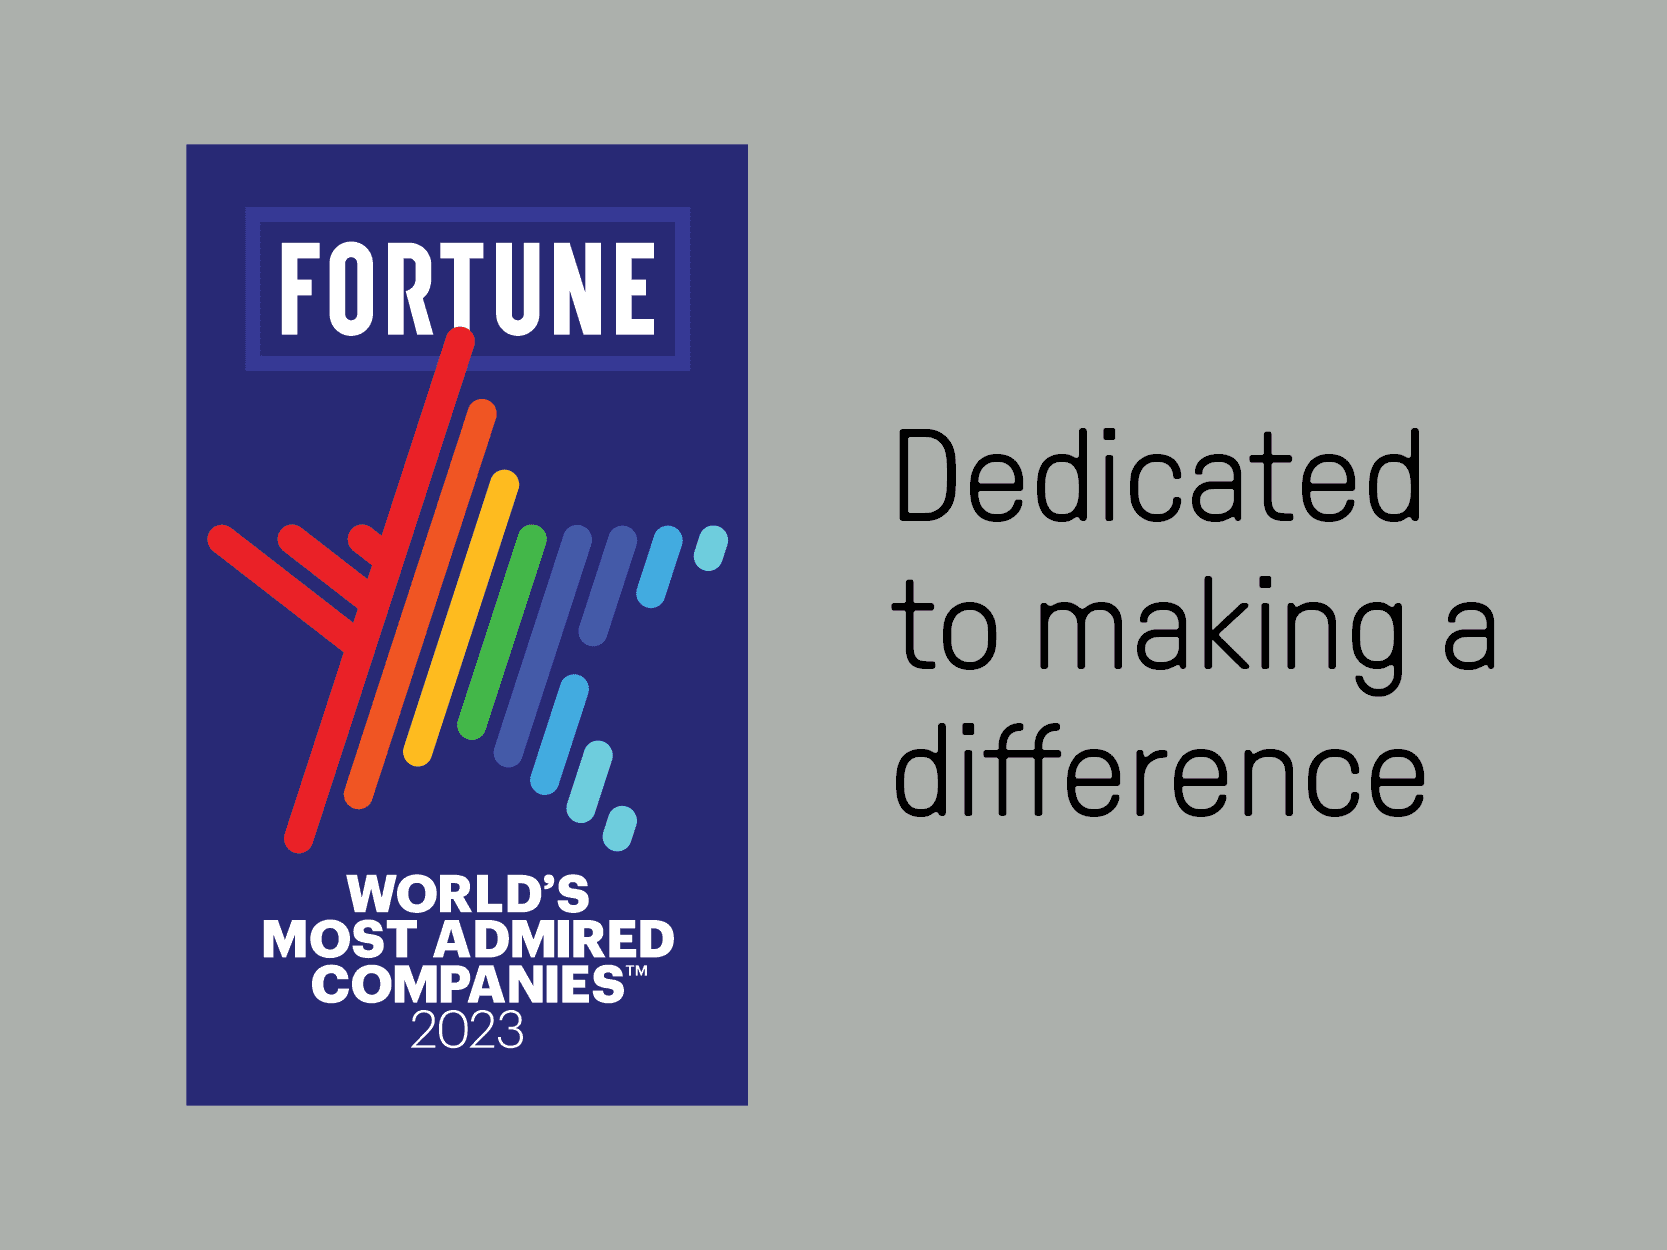 Blue Fortune Worlds Most Admired Companies 2023 logo on a grey background with black text that reads Dedicated to making a difference